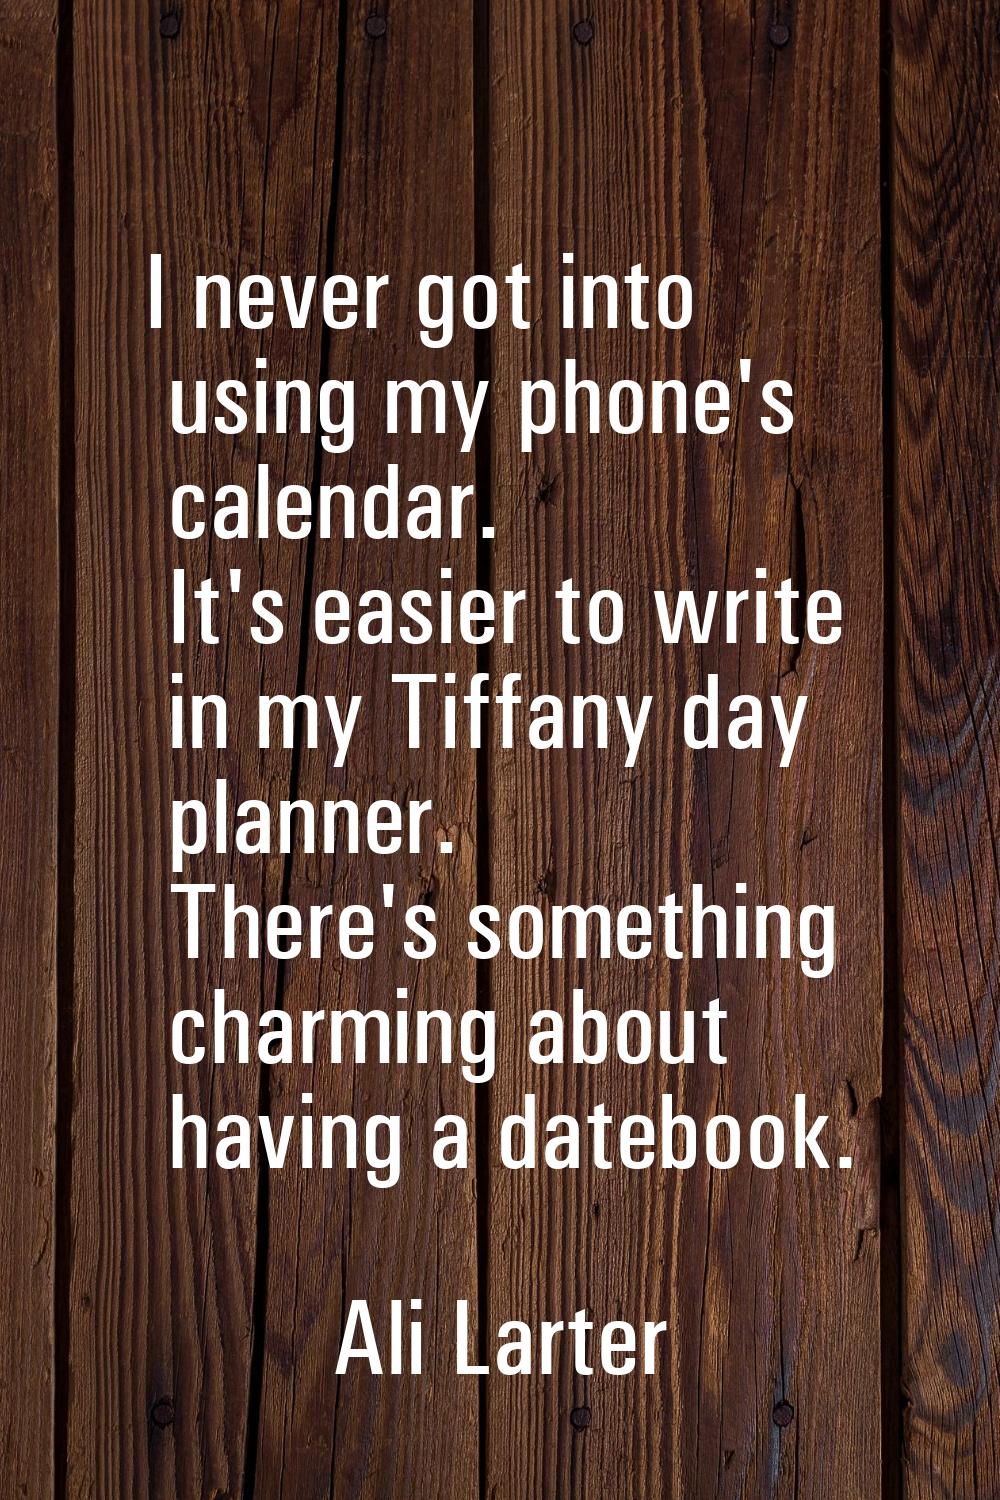 I never got into using my phone's calendar. It's easier to write in my Tiffany day planner. There's